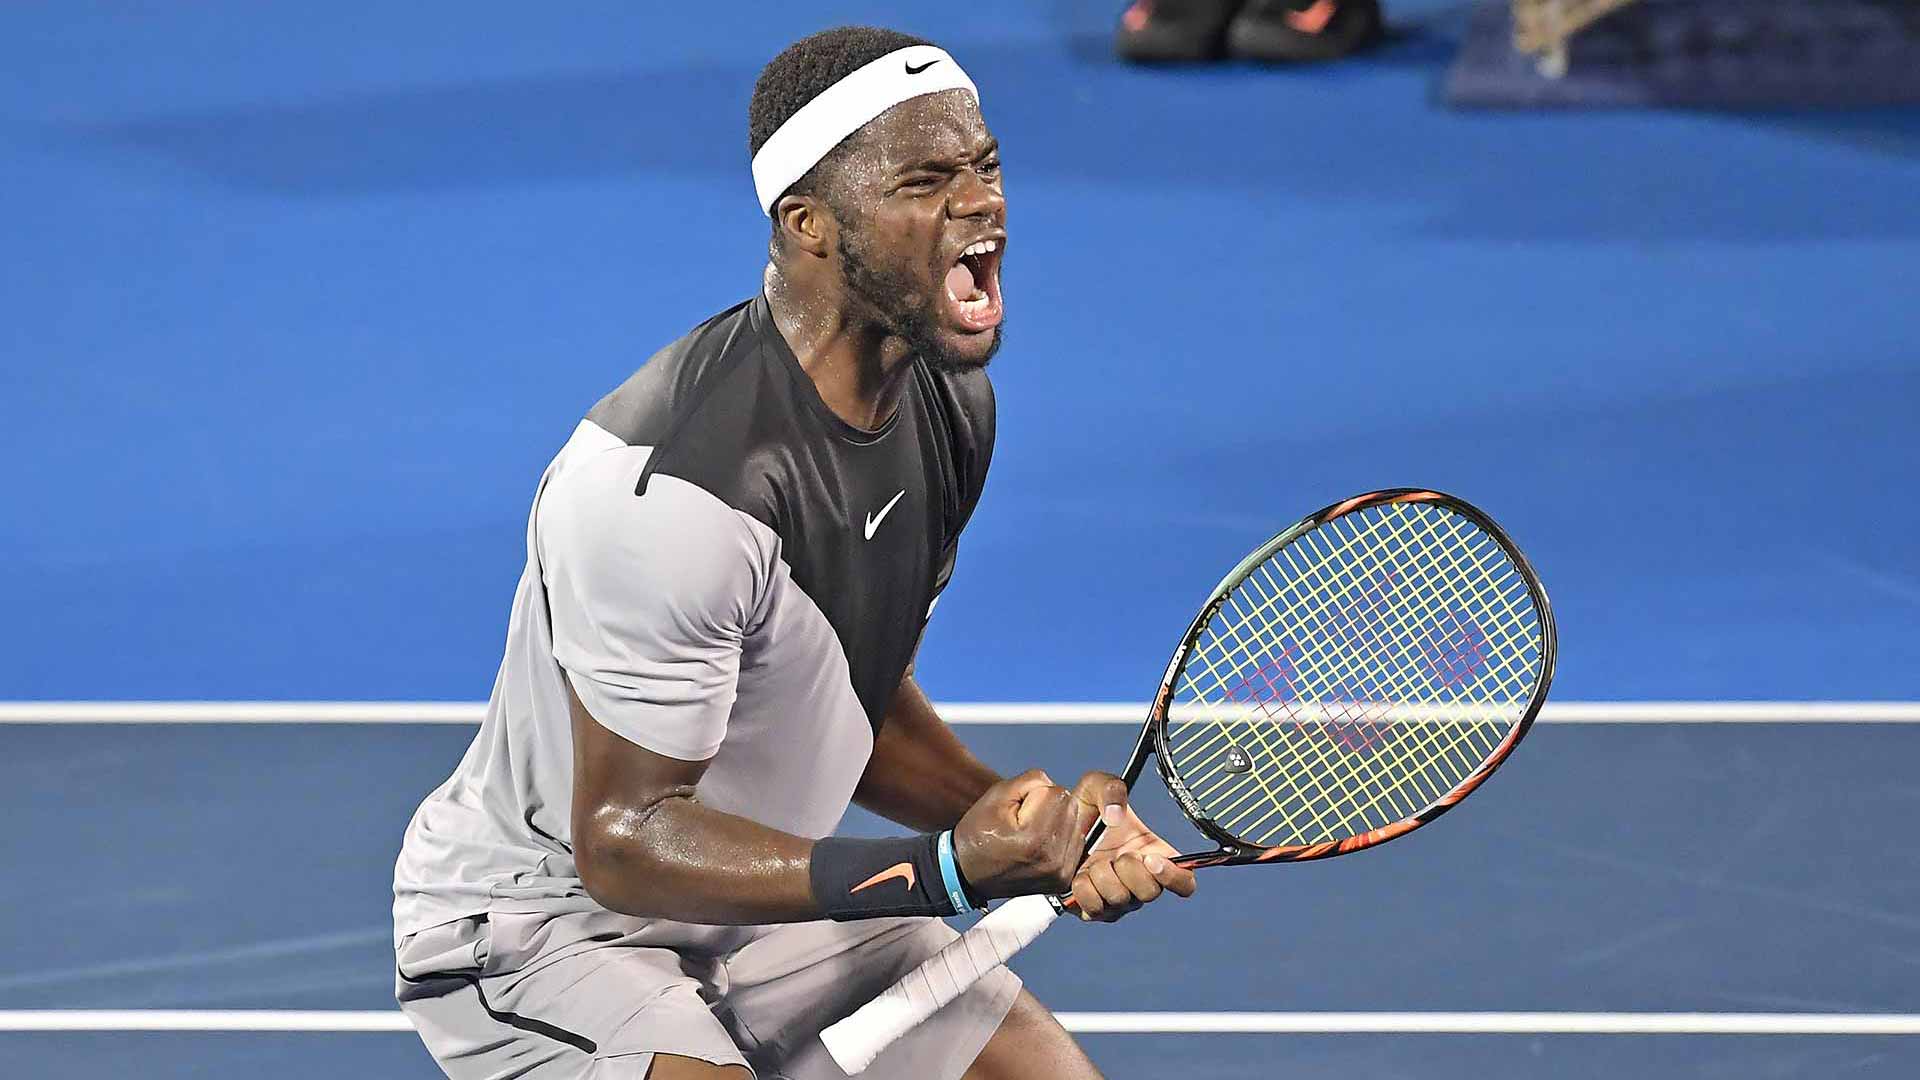 Tiafoe Reaches Second Straight Quarter Final With Win Over Del